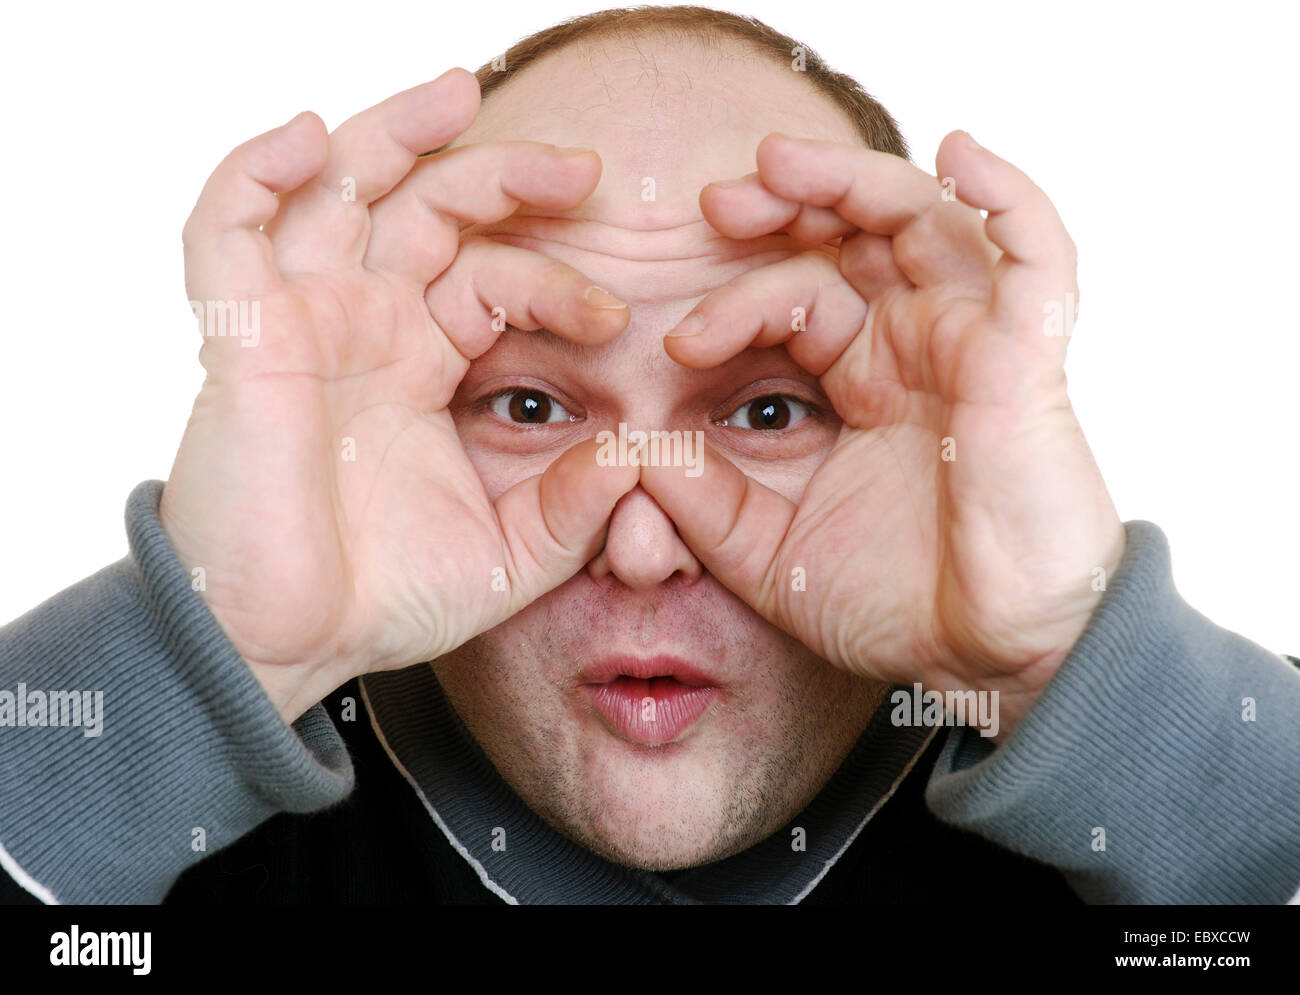 man making observe sign Stock Photo